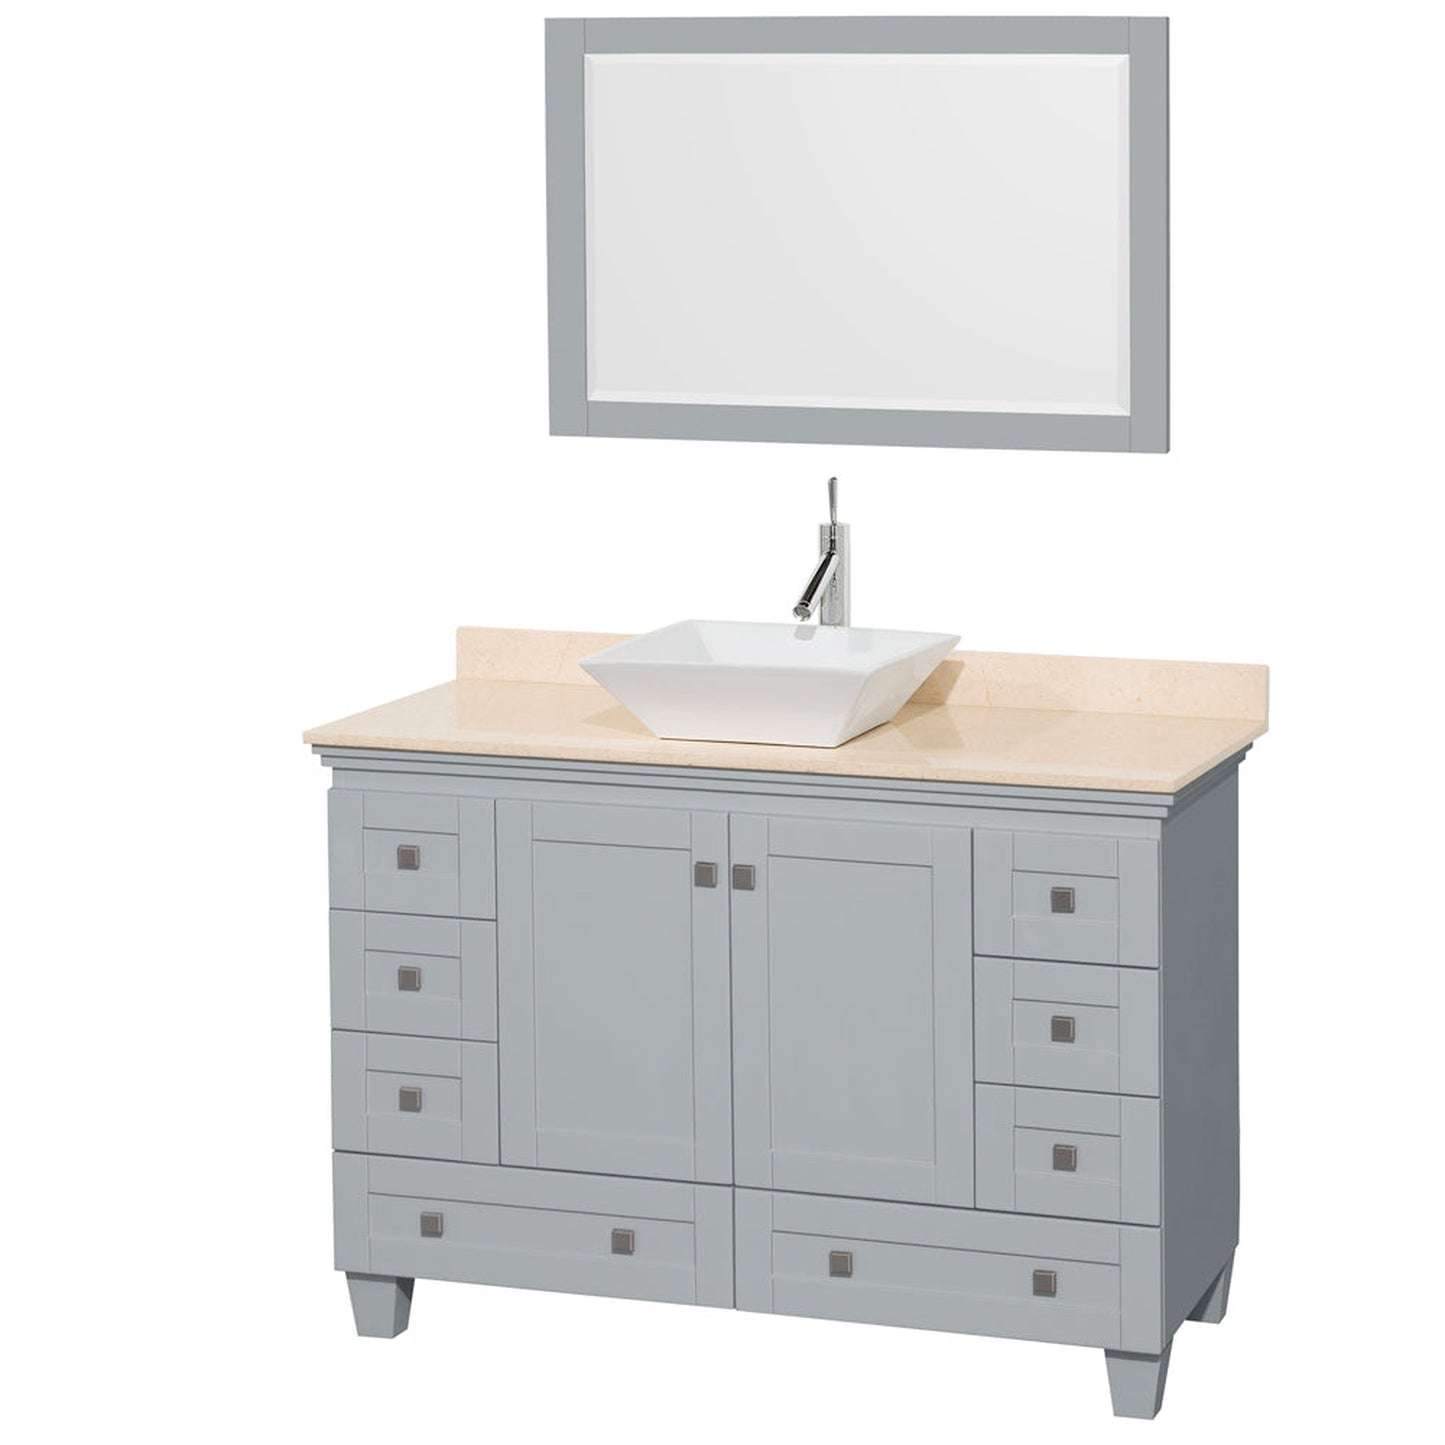 Wyndham Collection Acclaim 48" Single Bathroom Vanity in Oyster Gray With Ivory Marble Countertop, Pyra White Porcelain Sink & 24" Mirror